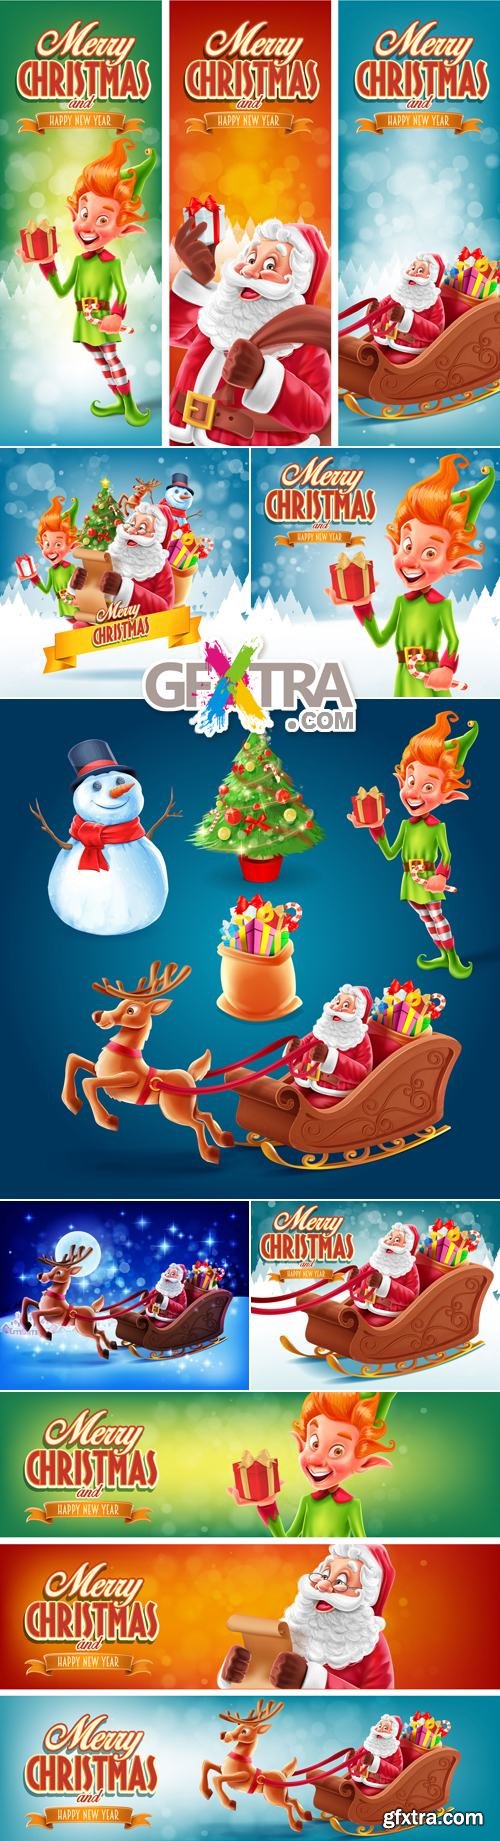 Christmas Backgrounds & Banners Vector